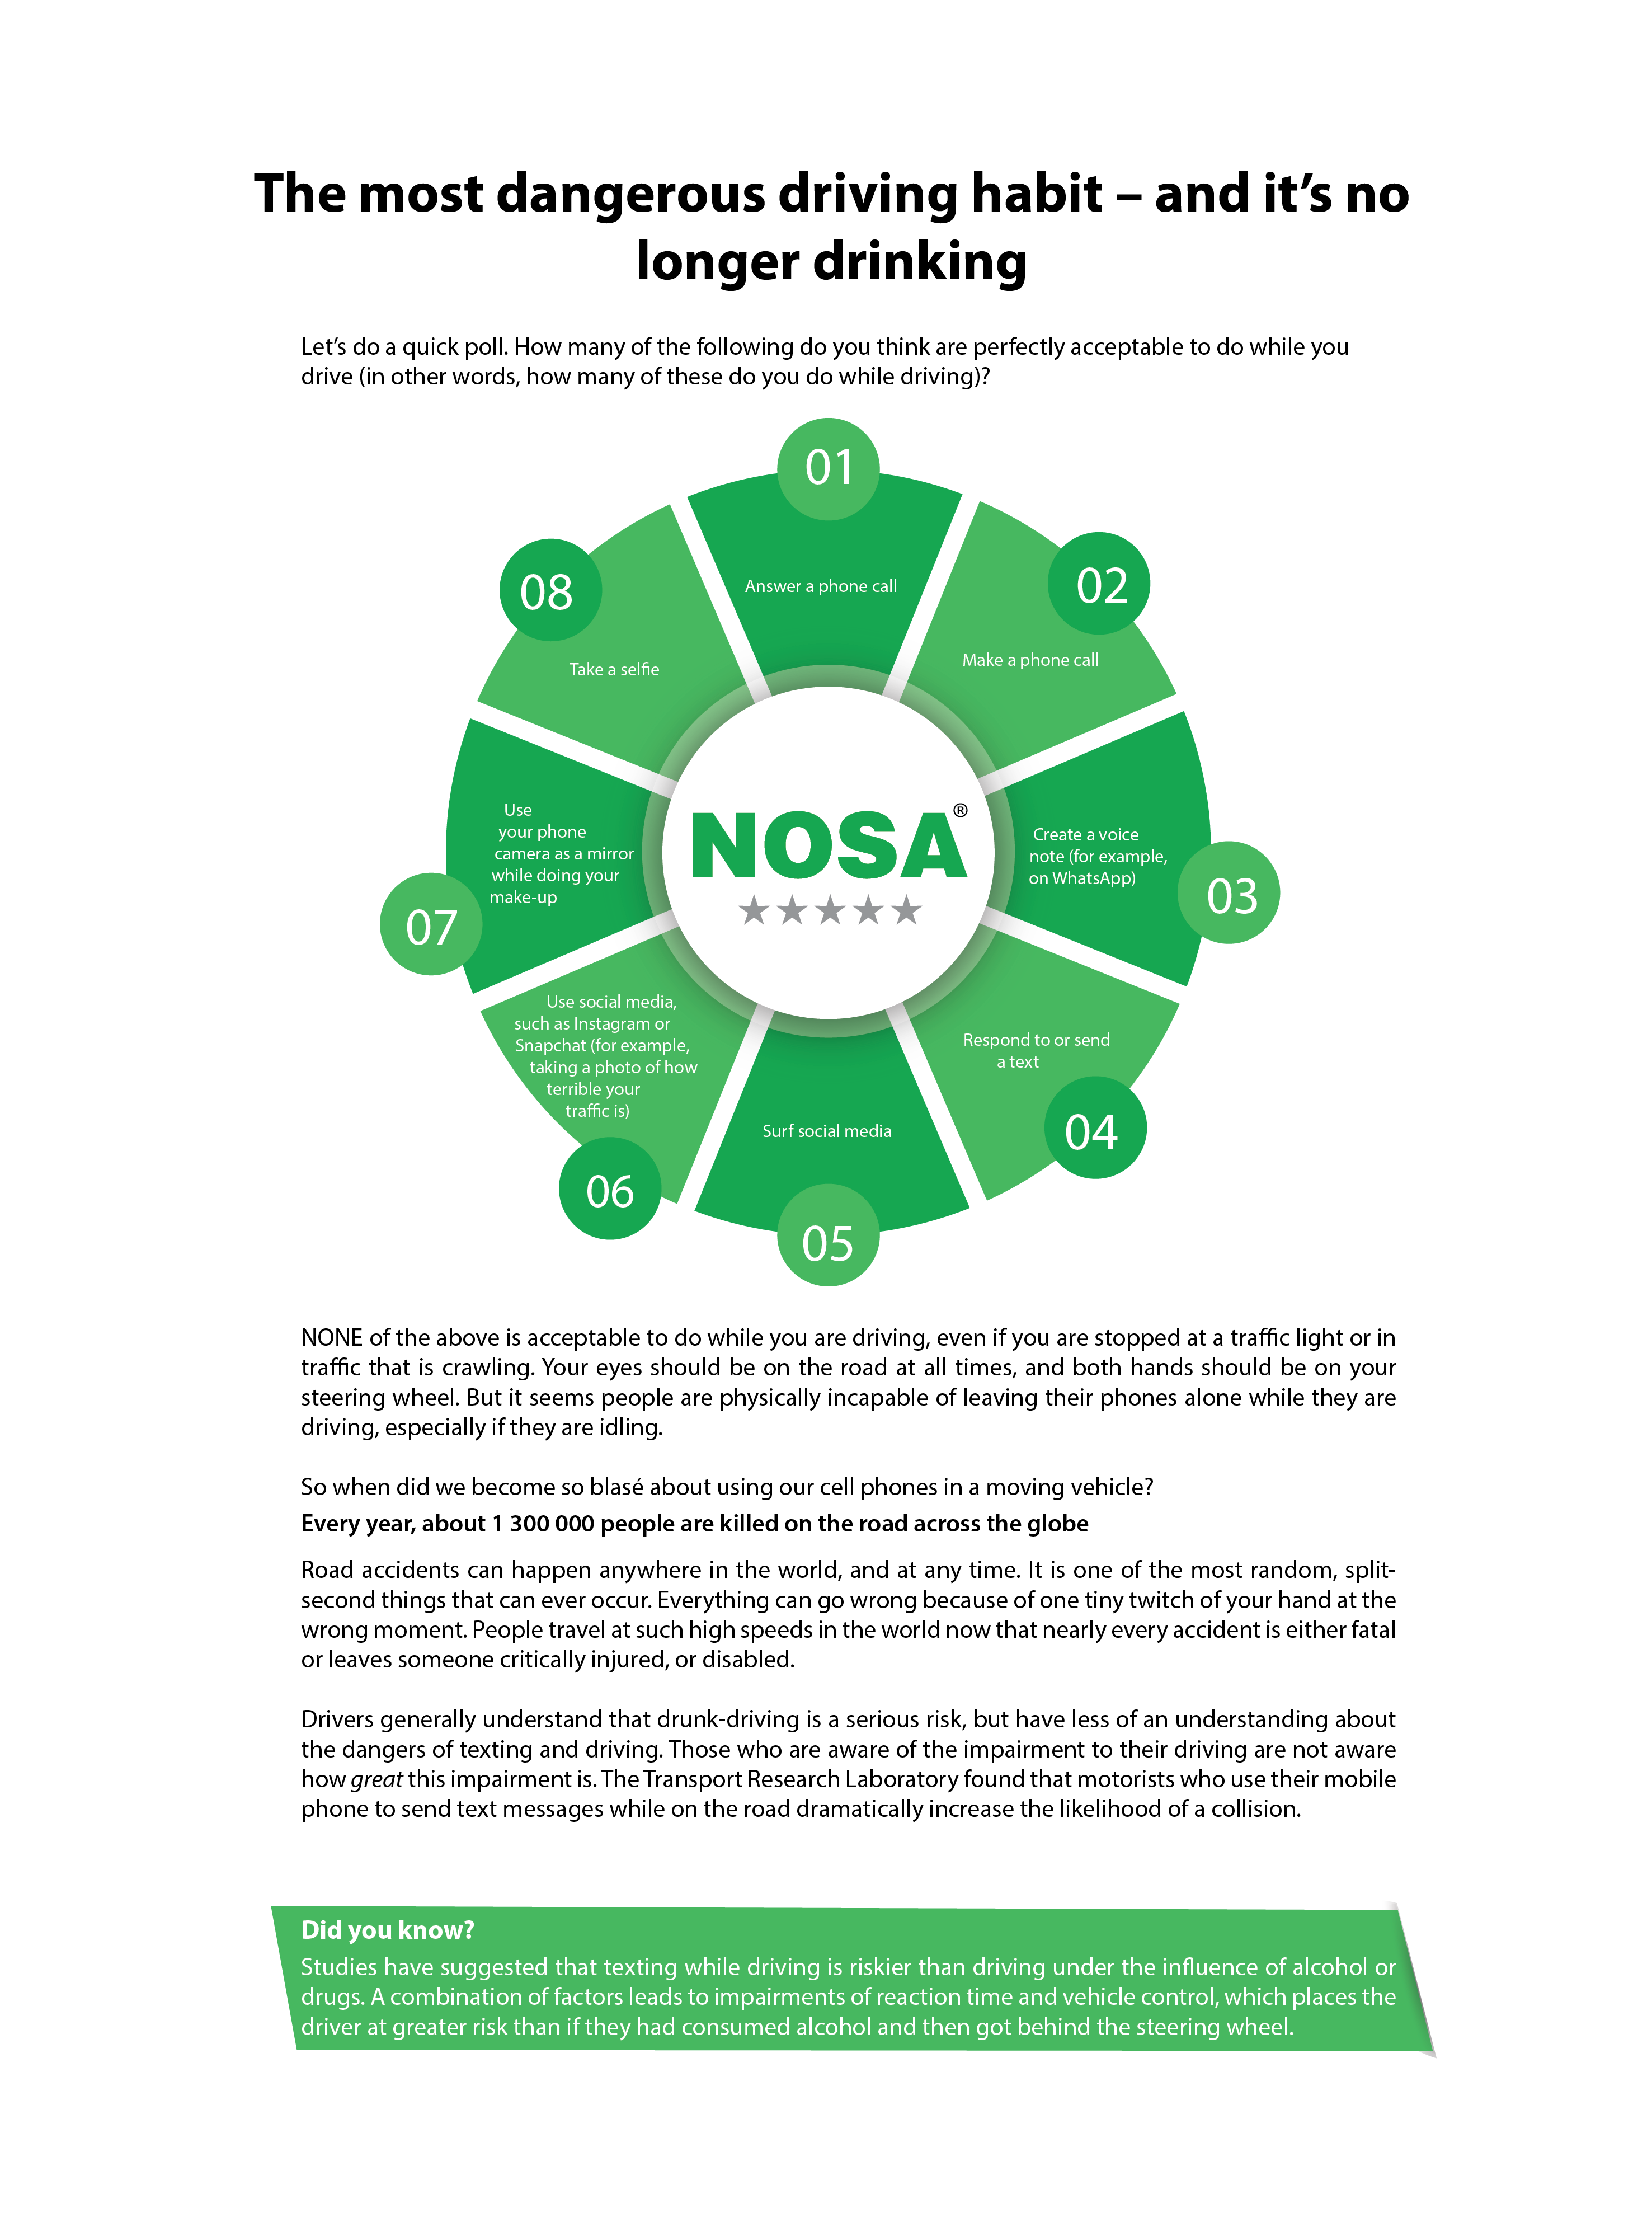 nosa to print-01.png